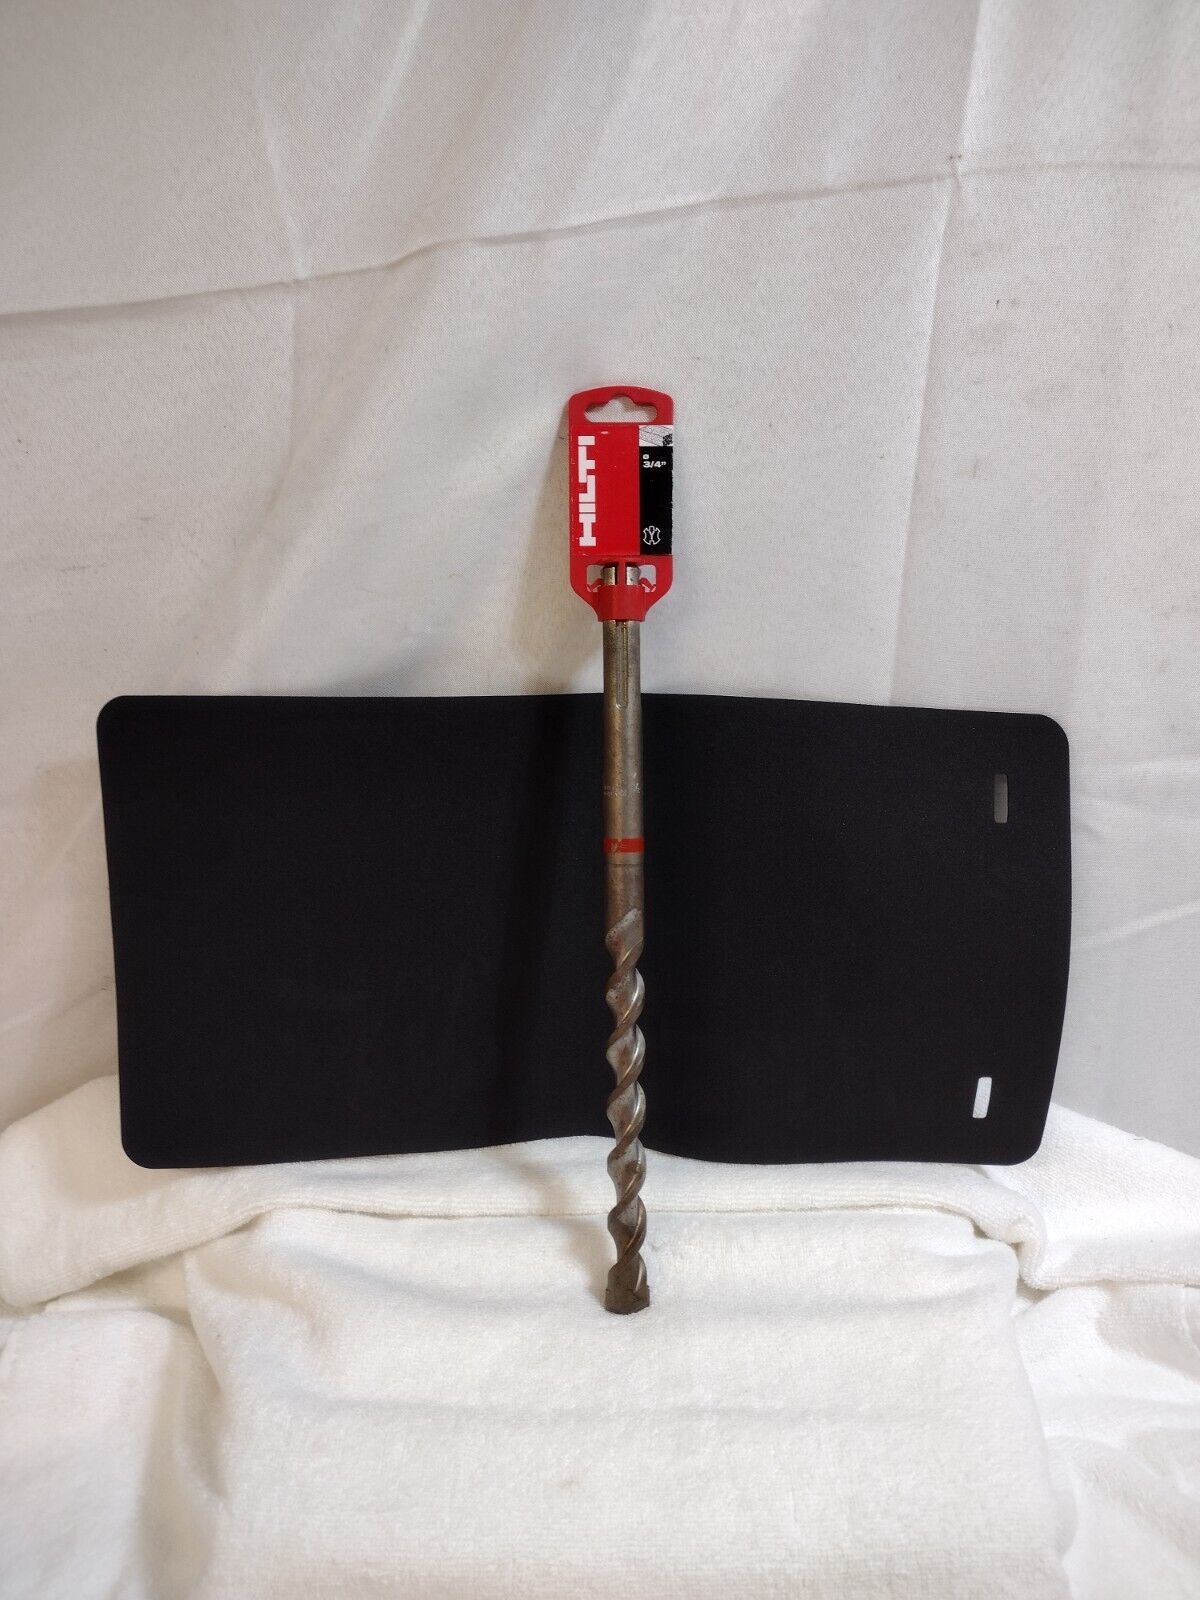 New/Old Stock, Hilti 428463 TE-Y 3/4" x 13" 7" Drilling Depth Hammer Style Drill - $49.84